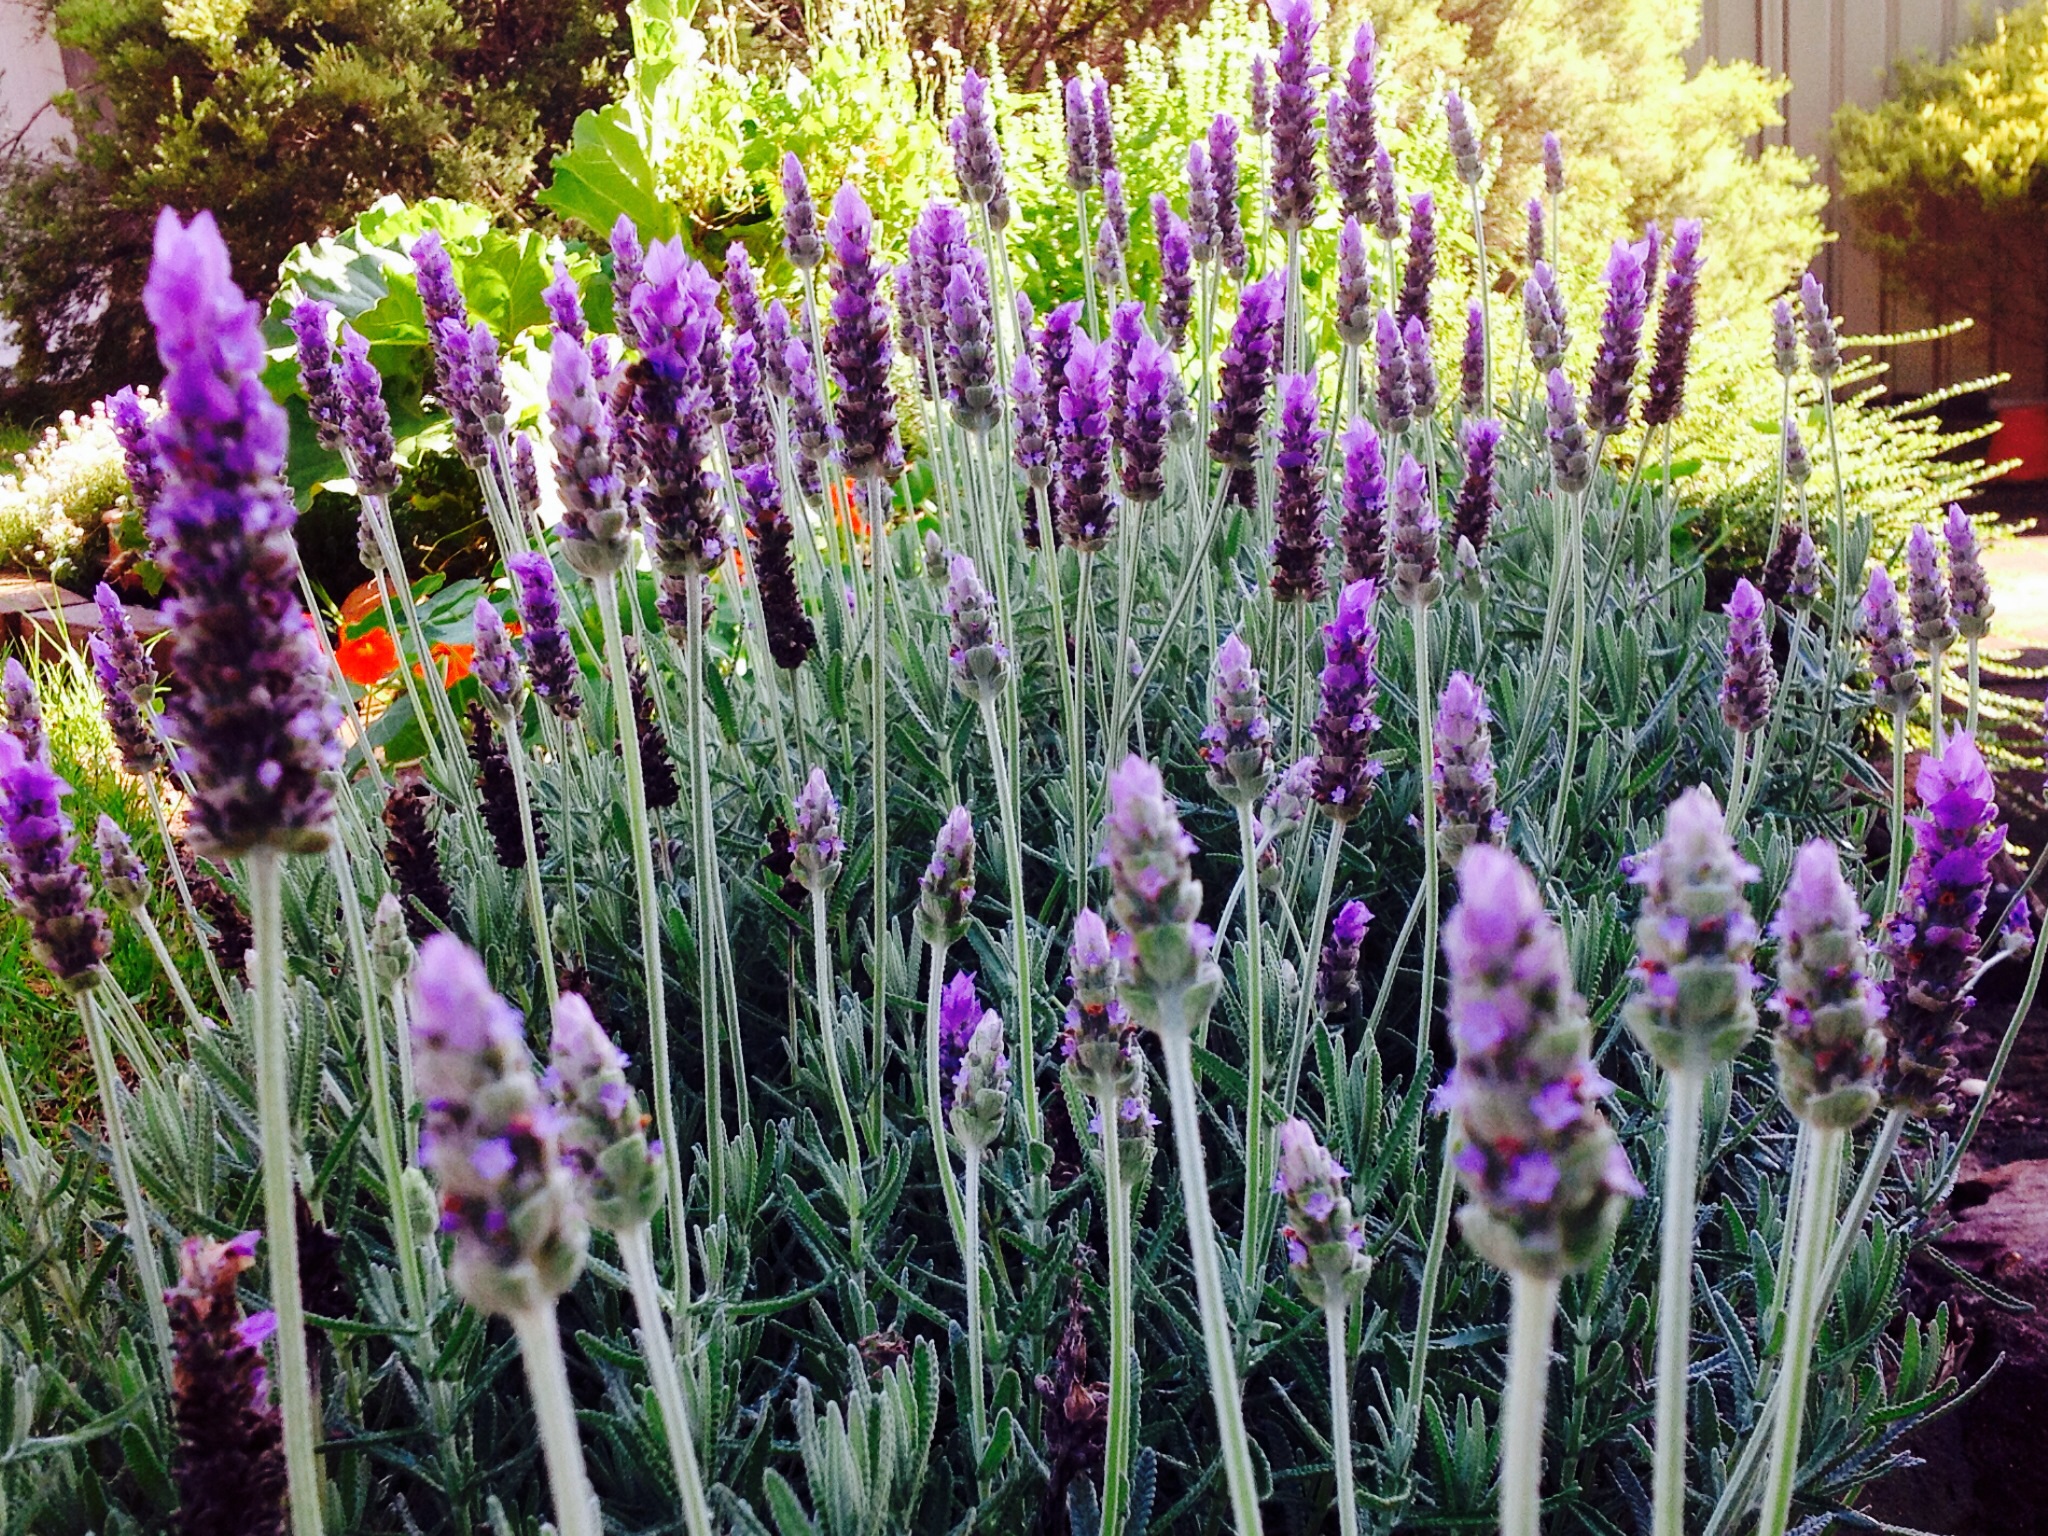 #Lavender, a garden hedge and lessons in patience, bees, circle of friends, garden, how to grow a hedge, Grow lavender, grow lavender from cuttings, hedging, home made, Lavender, make do, Memories, plant cuttings, Sharing, simple living, Transplant, vegetable garden, My lavender flowers